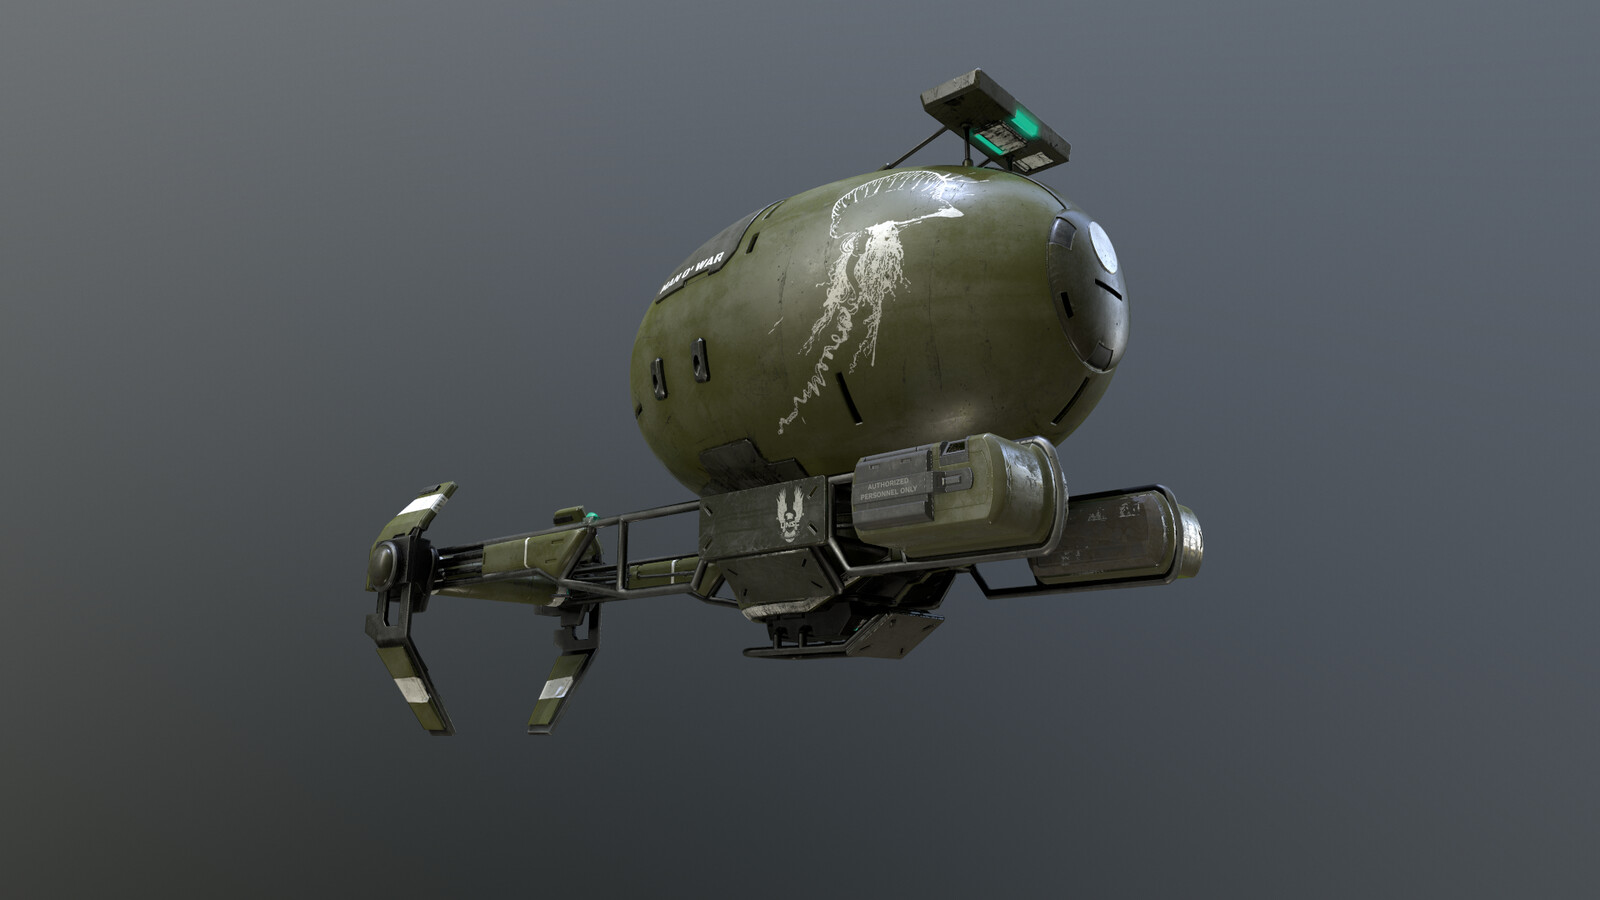 The UNSC Man O' War. Designed to quietly deliver supplies and ammunition to soldiers behind enemy lines.